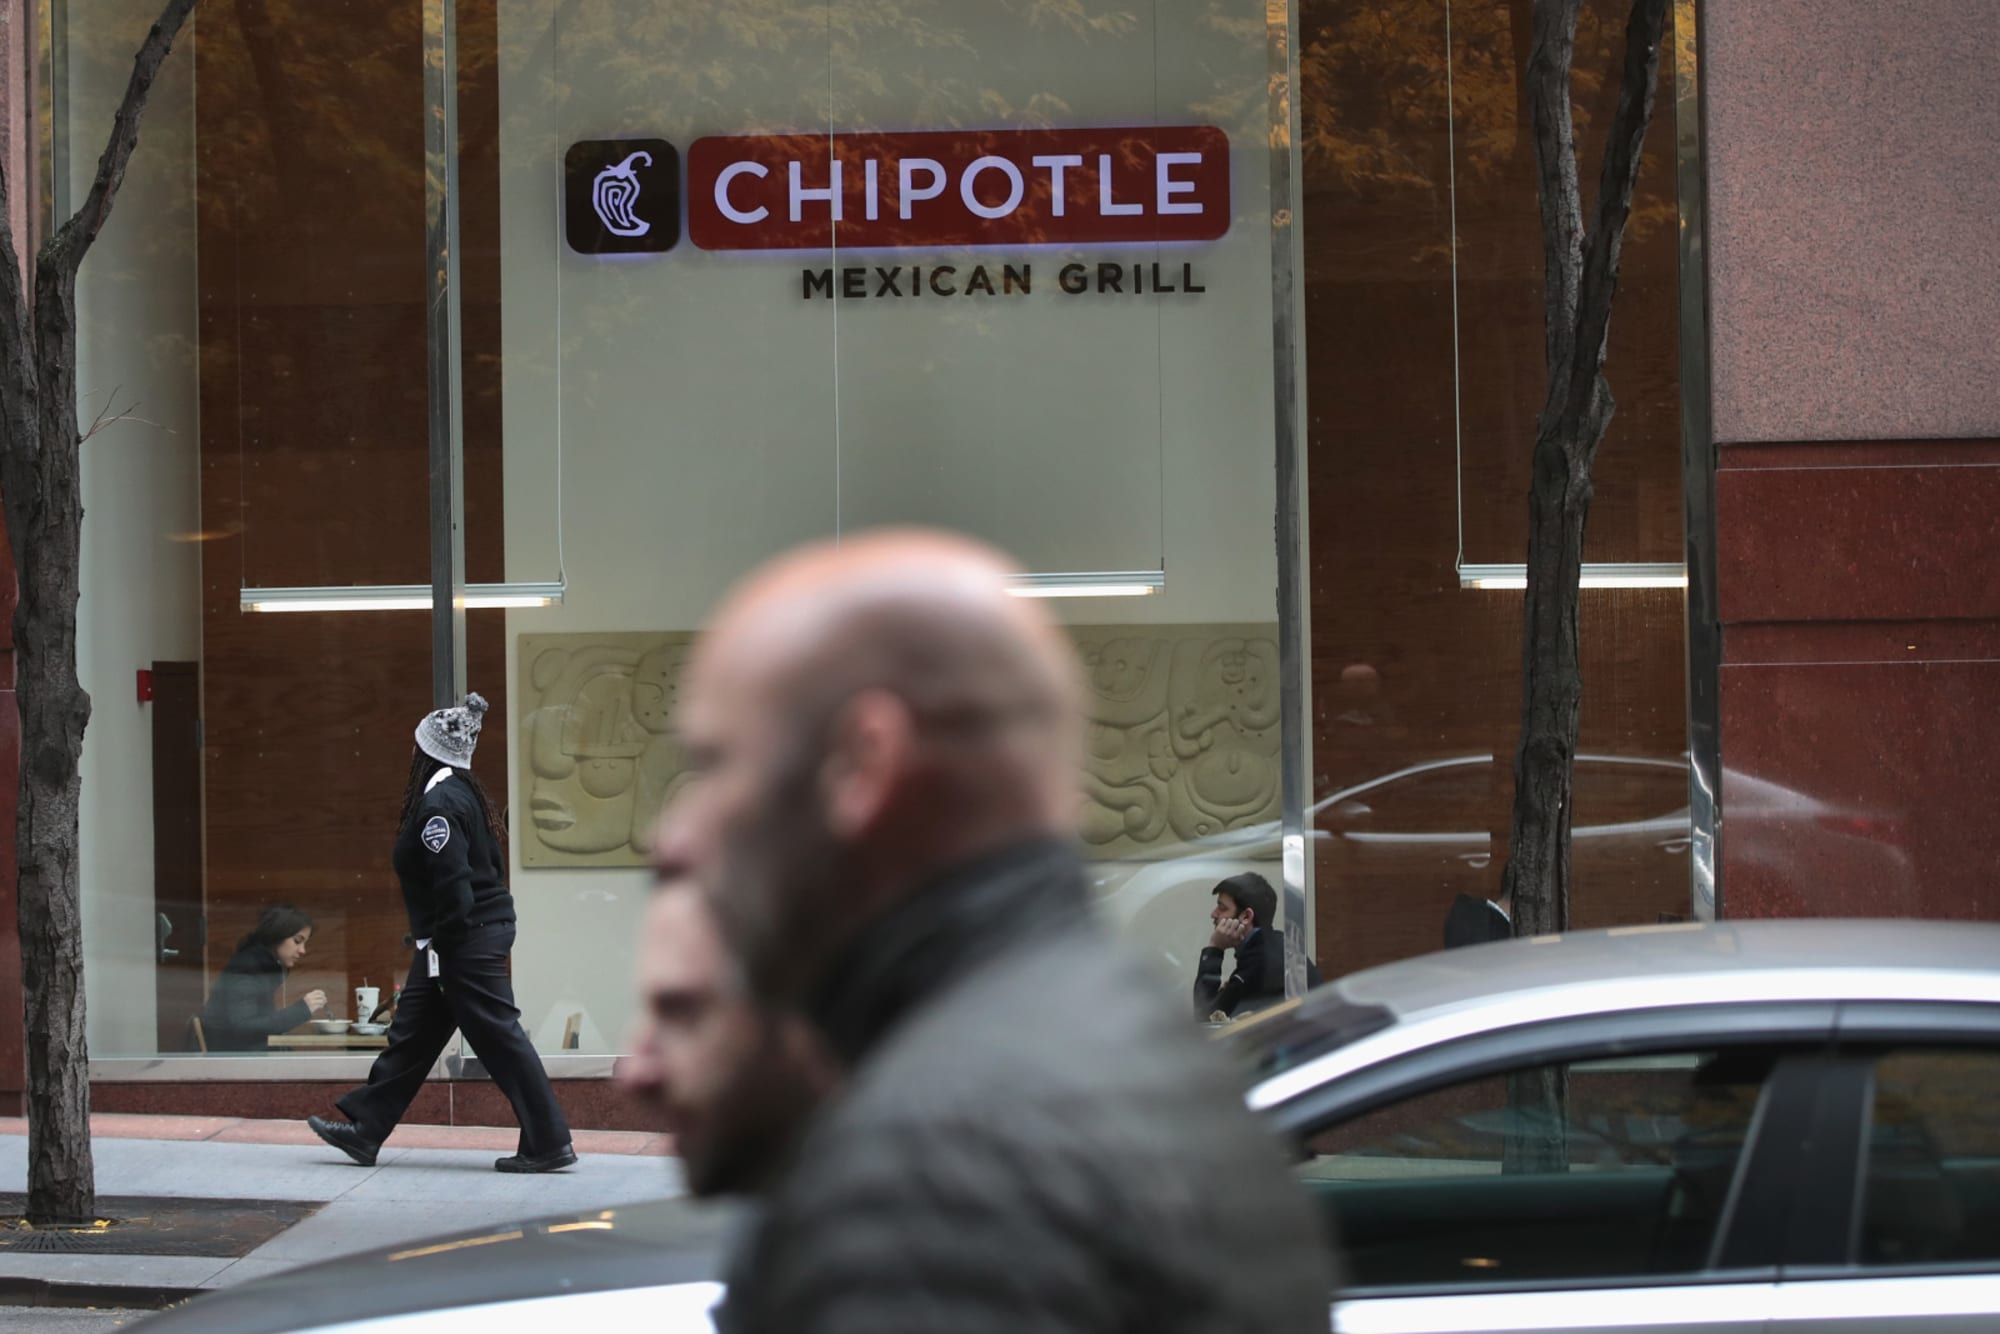 Is Chipotle open on Memorial Day 2018?